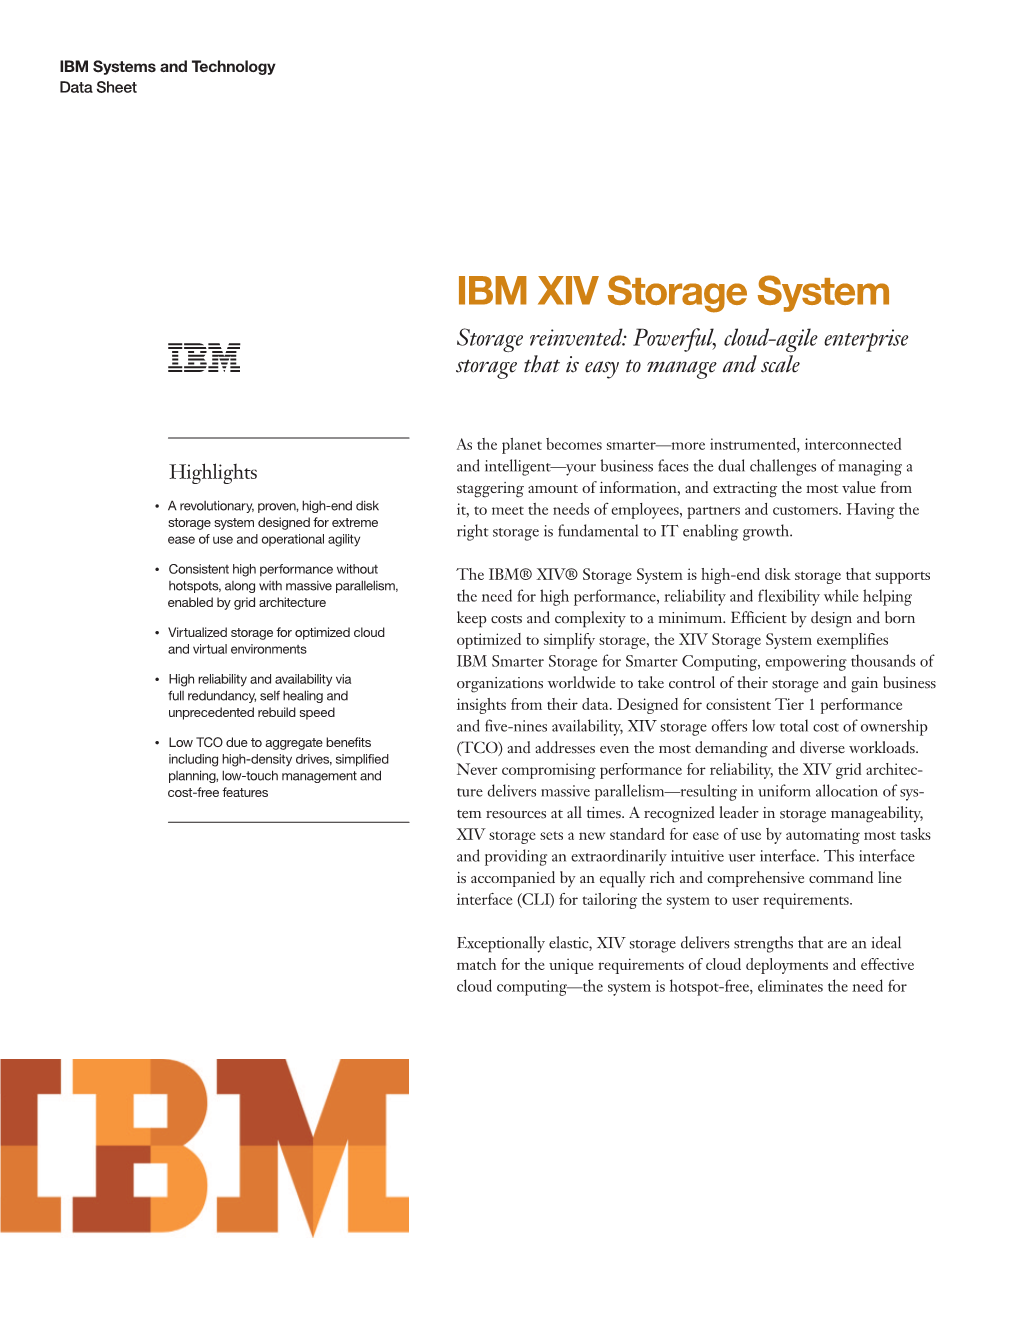 IBM XIV Storage System Storage Reinvented: Powerful, Cloud-Agile Enterprise Storage That Is Easy to Manage and Scale